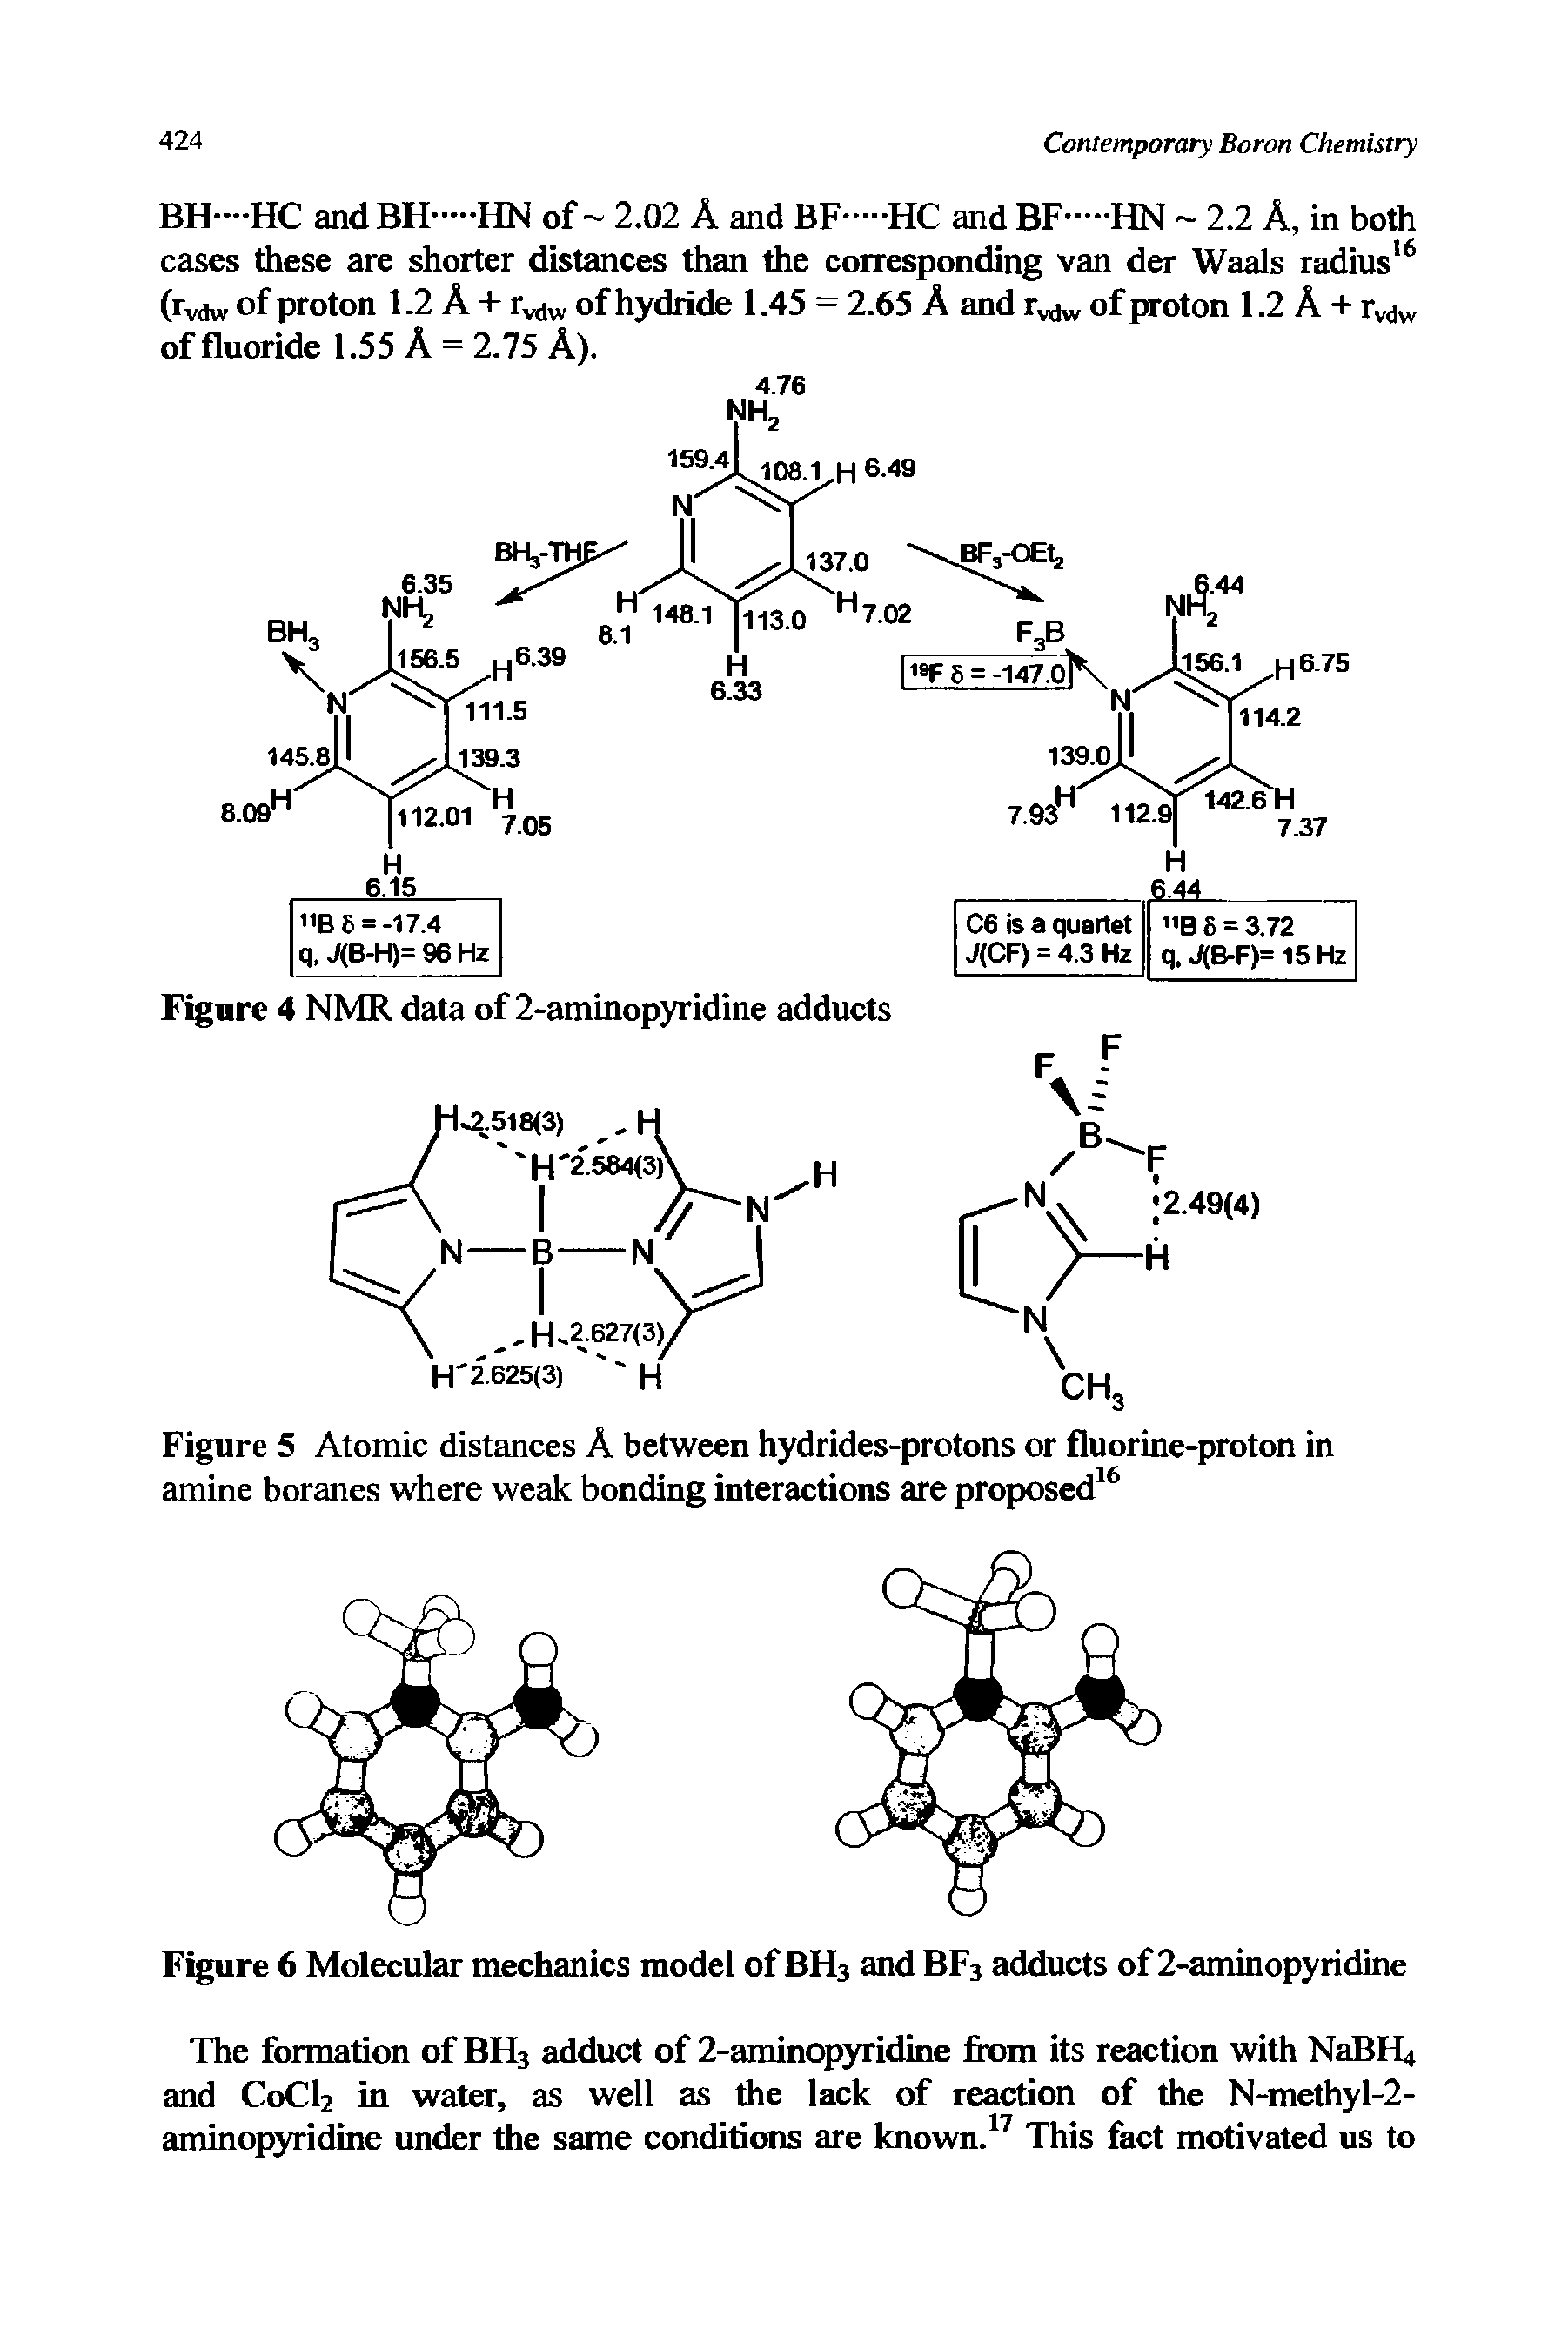 Figure 5 Atomic distances A between hydrides-protons or fluorine-proton in amine boranes where weak bonding interactions are proposed16...